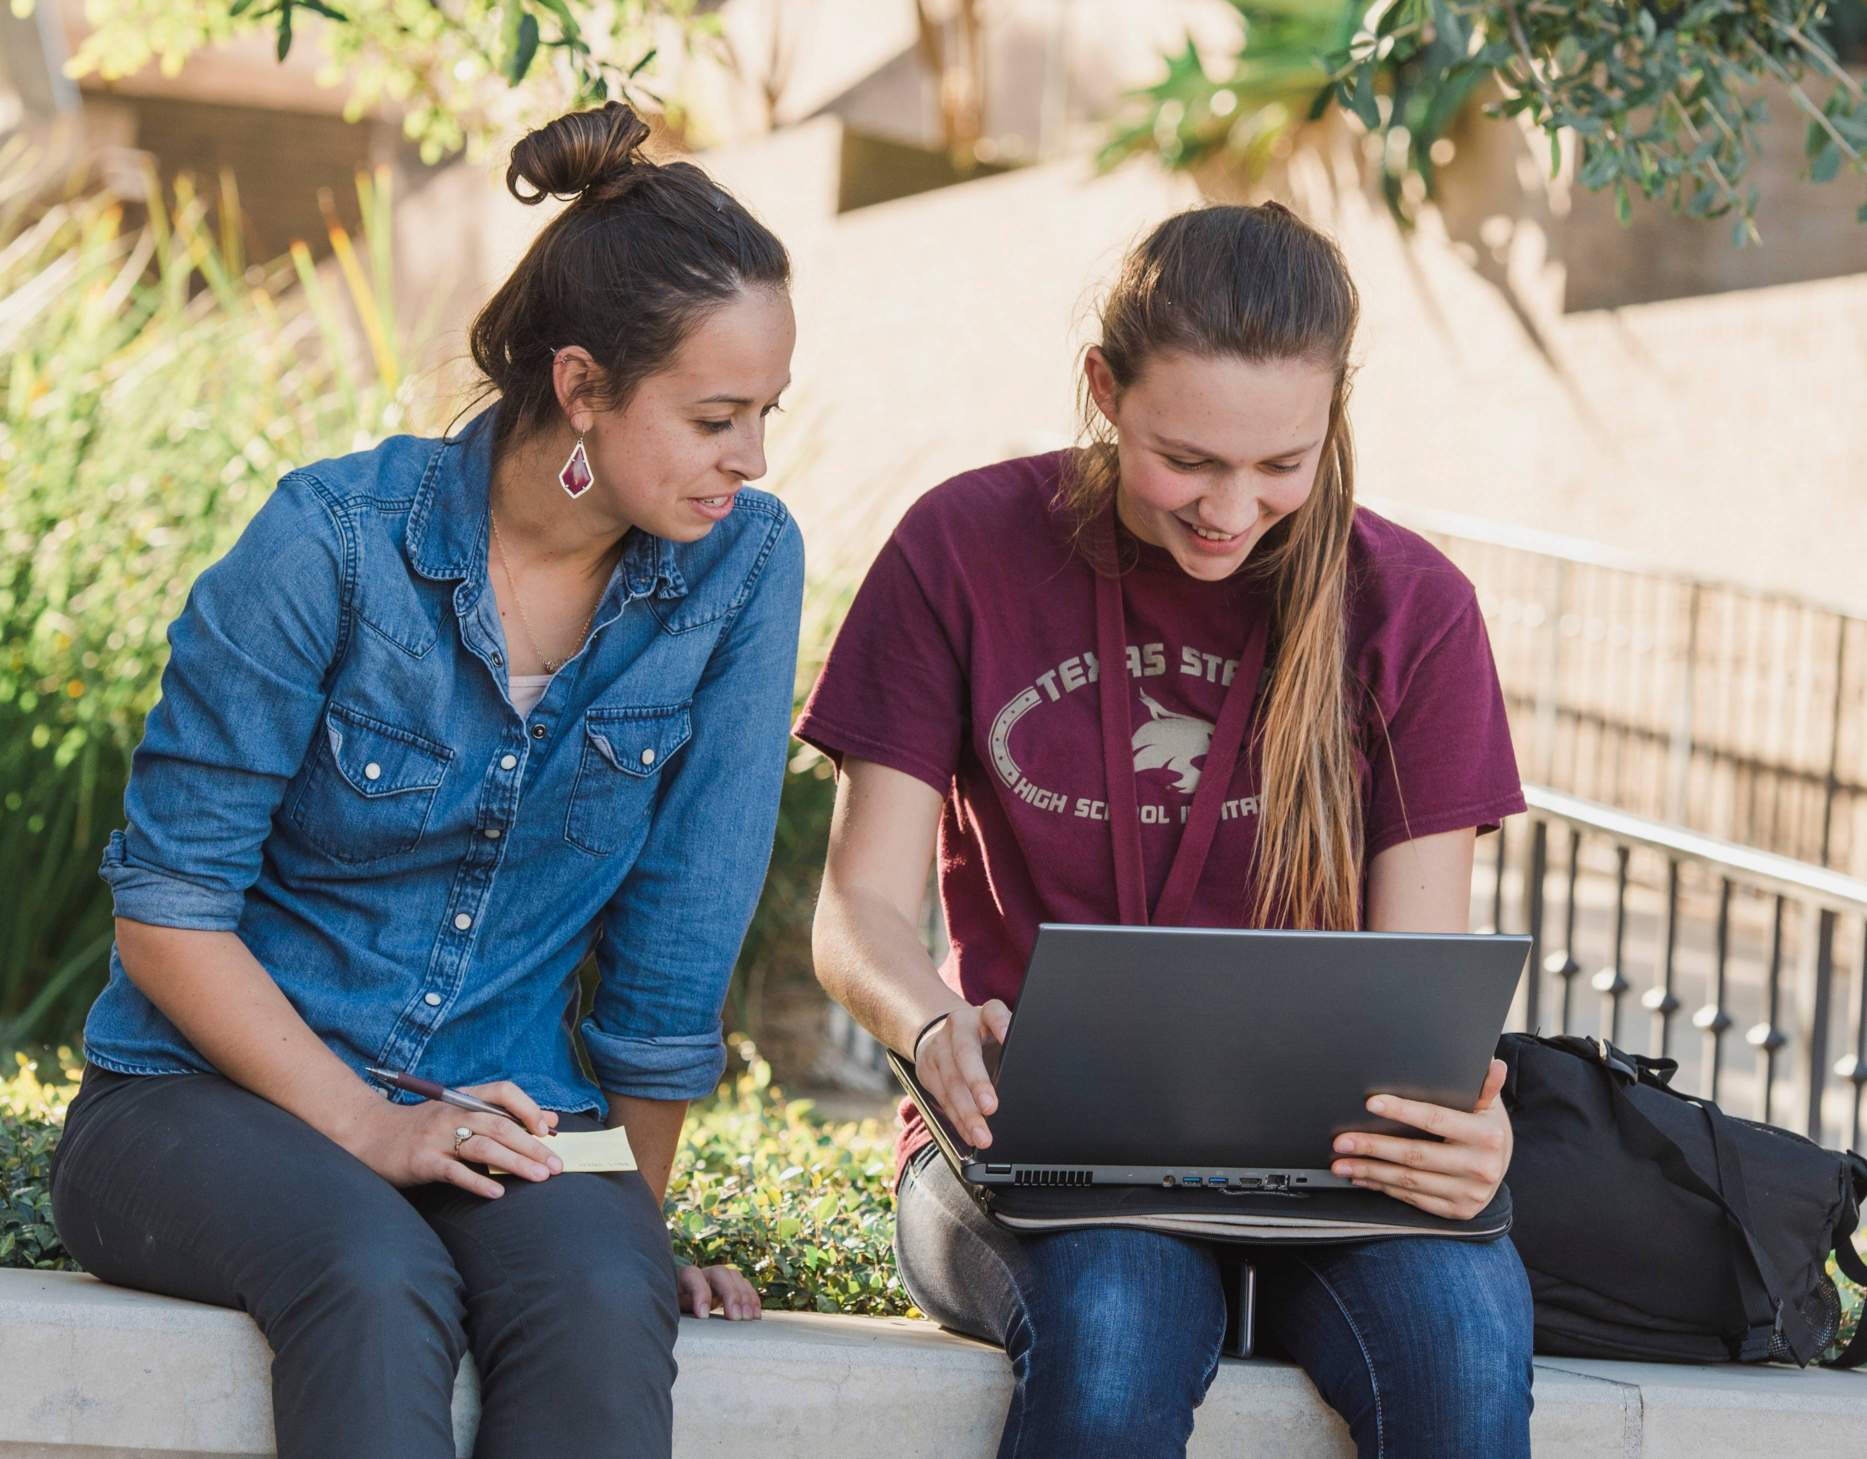 Students Studying Outside. Both students are looking at one laptop.